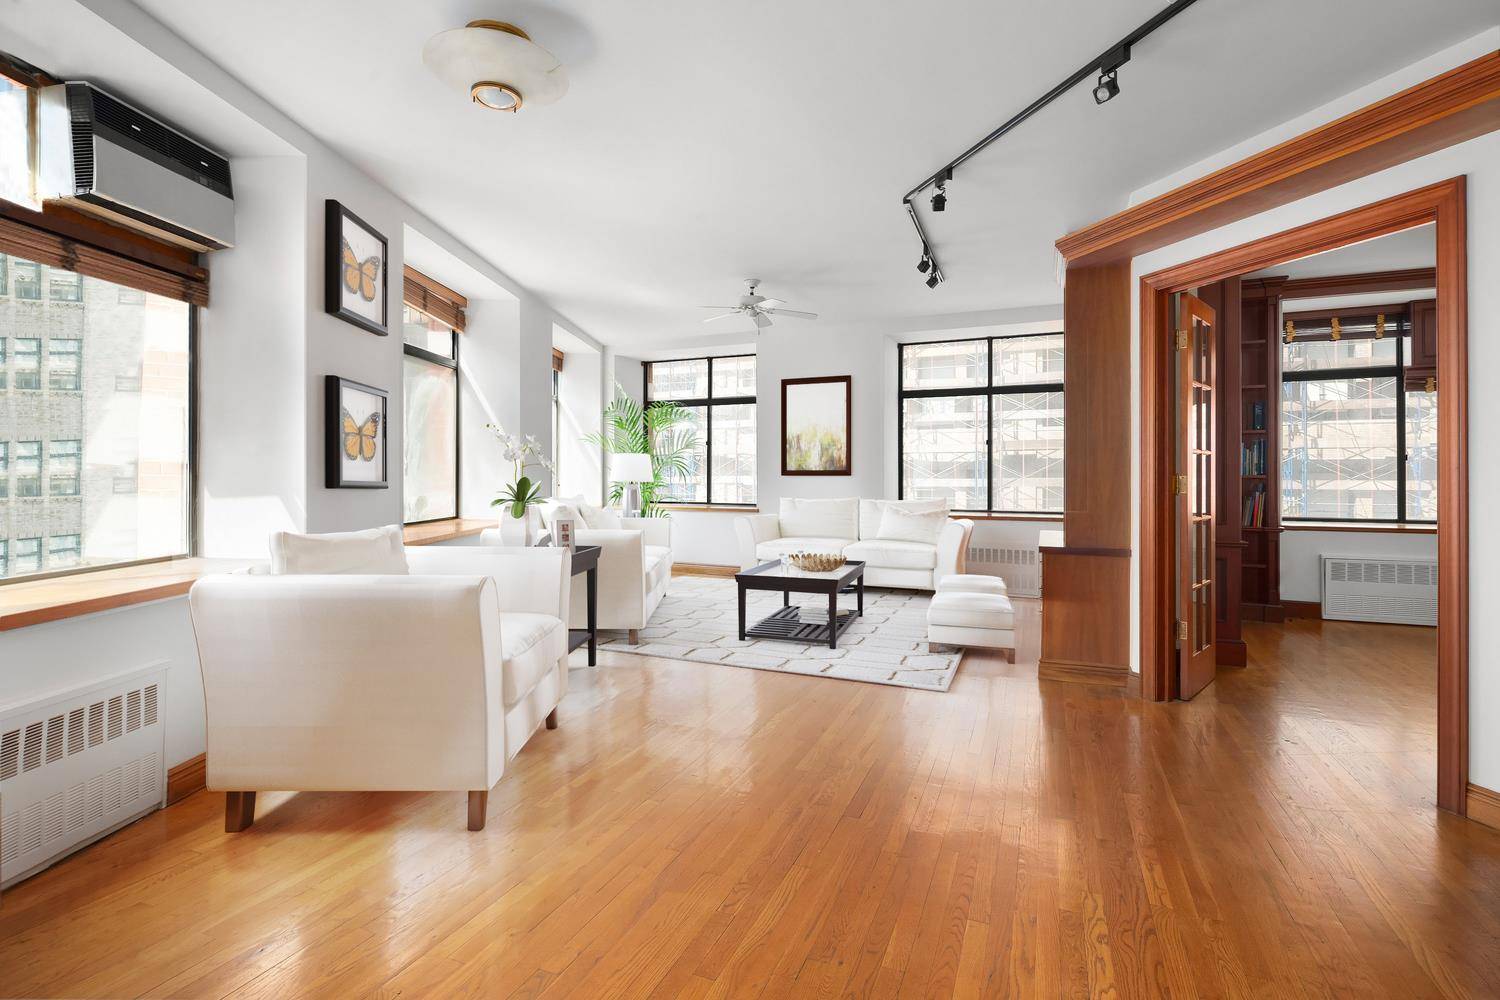 JUST LISTED Sprawling PRIME TRIBECA 2 bed, 1.